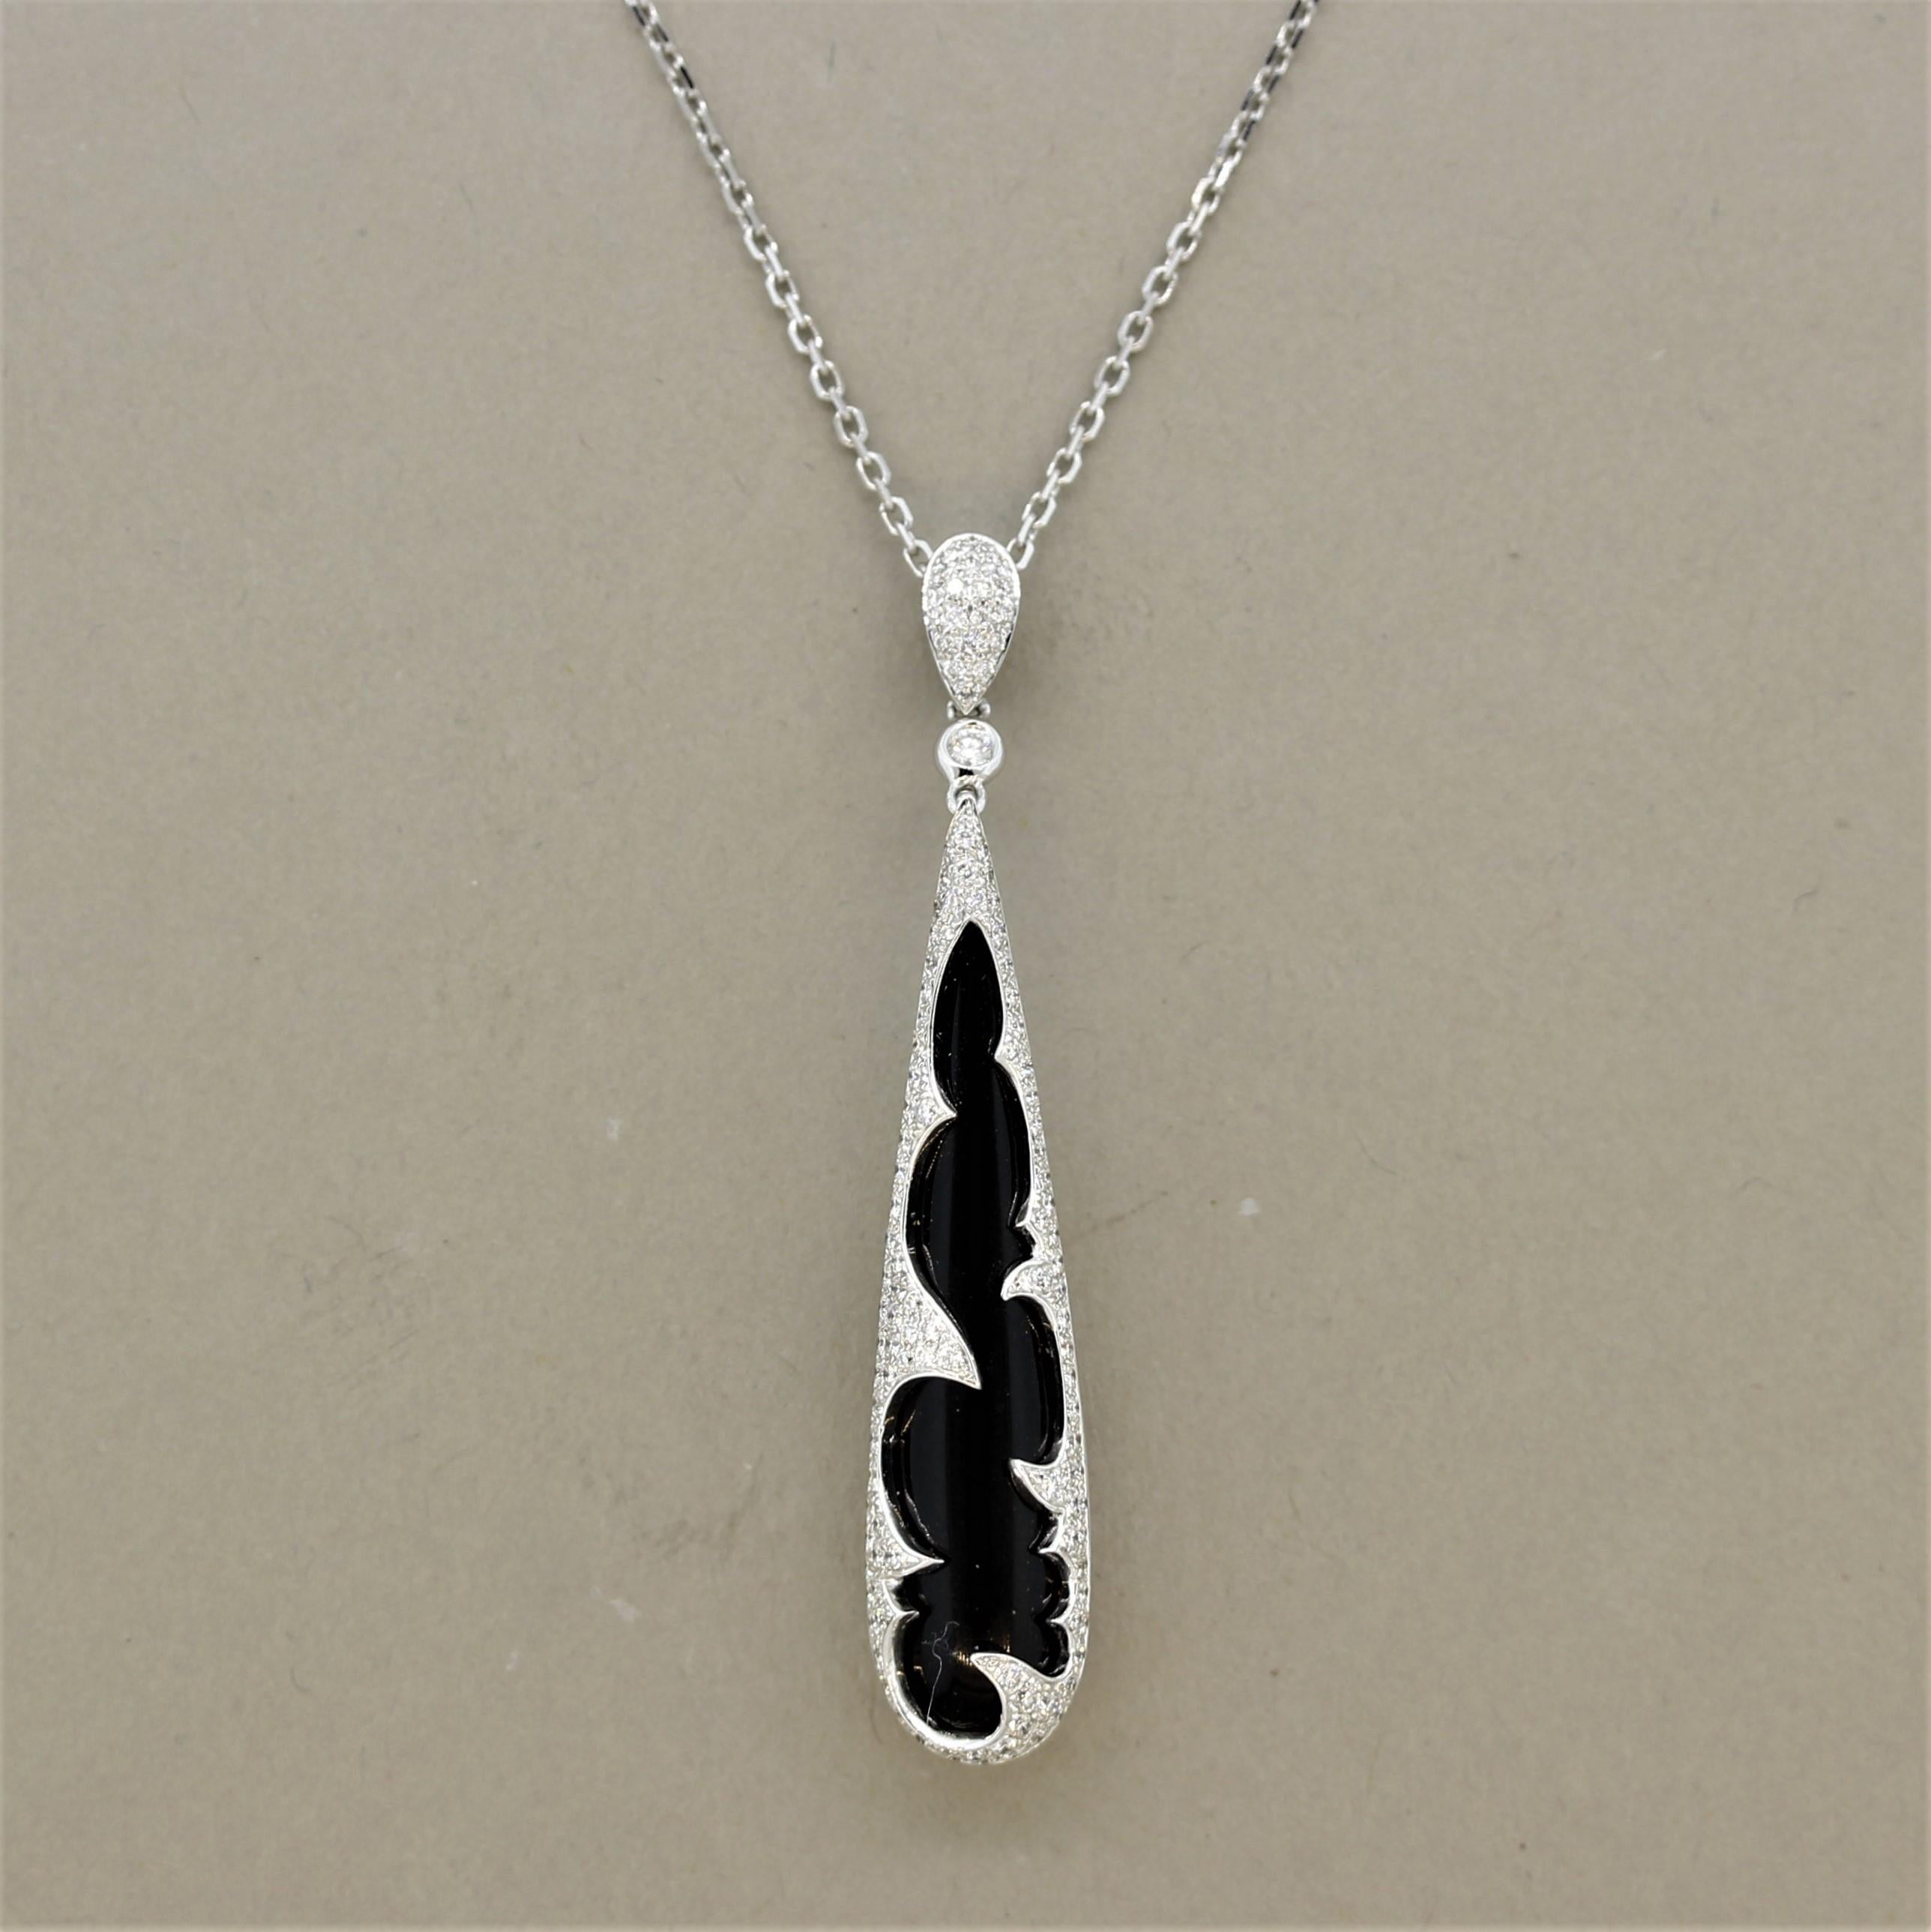 A sleek and sexy pendant featuring a jet-black piece of onyx shaped as a briolette with a bright polish. It is encased in 18k white gold set with 054 carats of bright round brilliant cut diamonds which contrast with the deep black onyx. Made in 18k